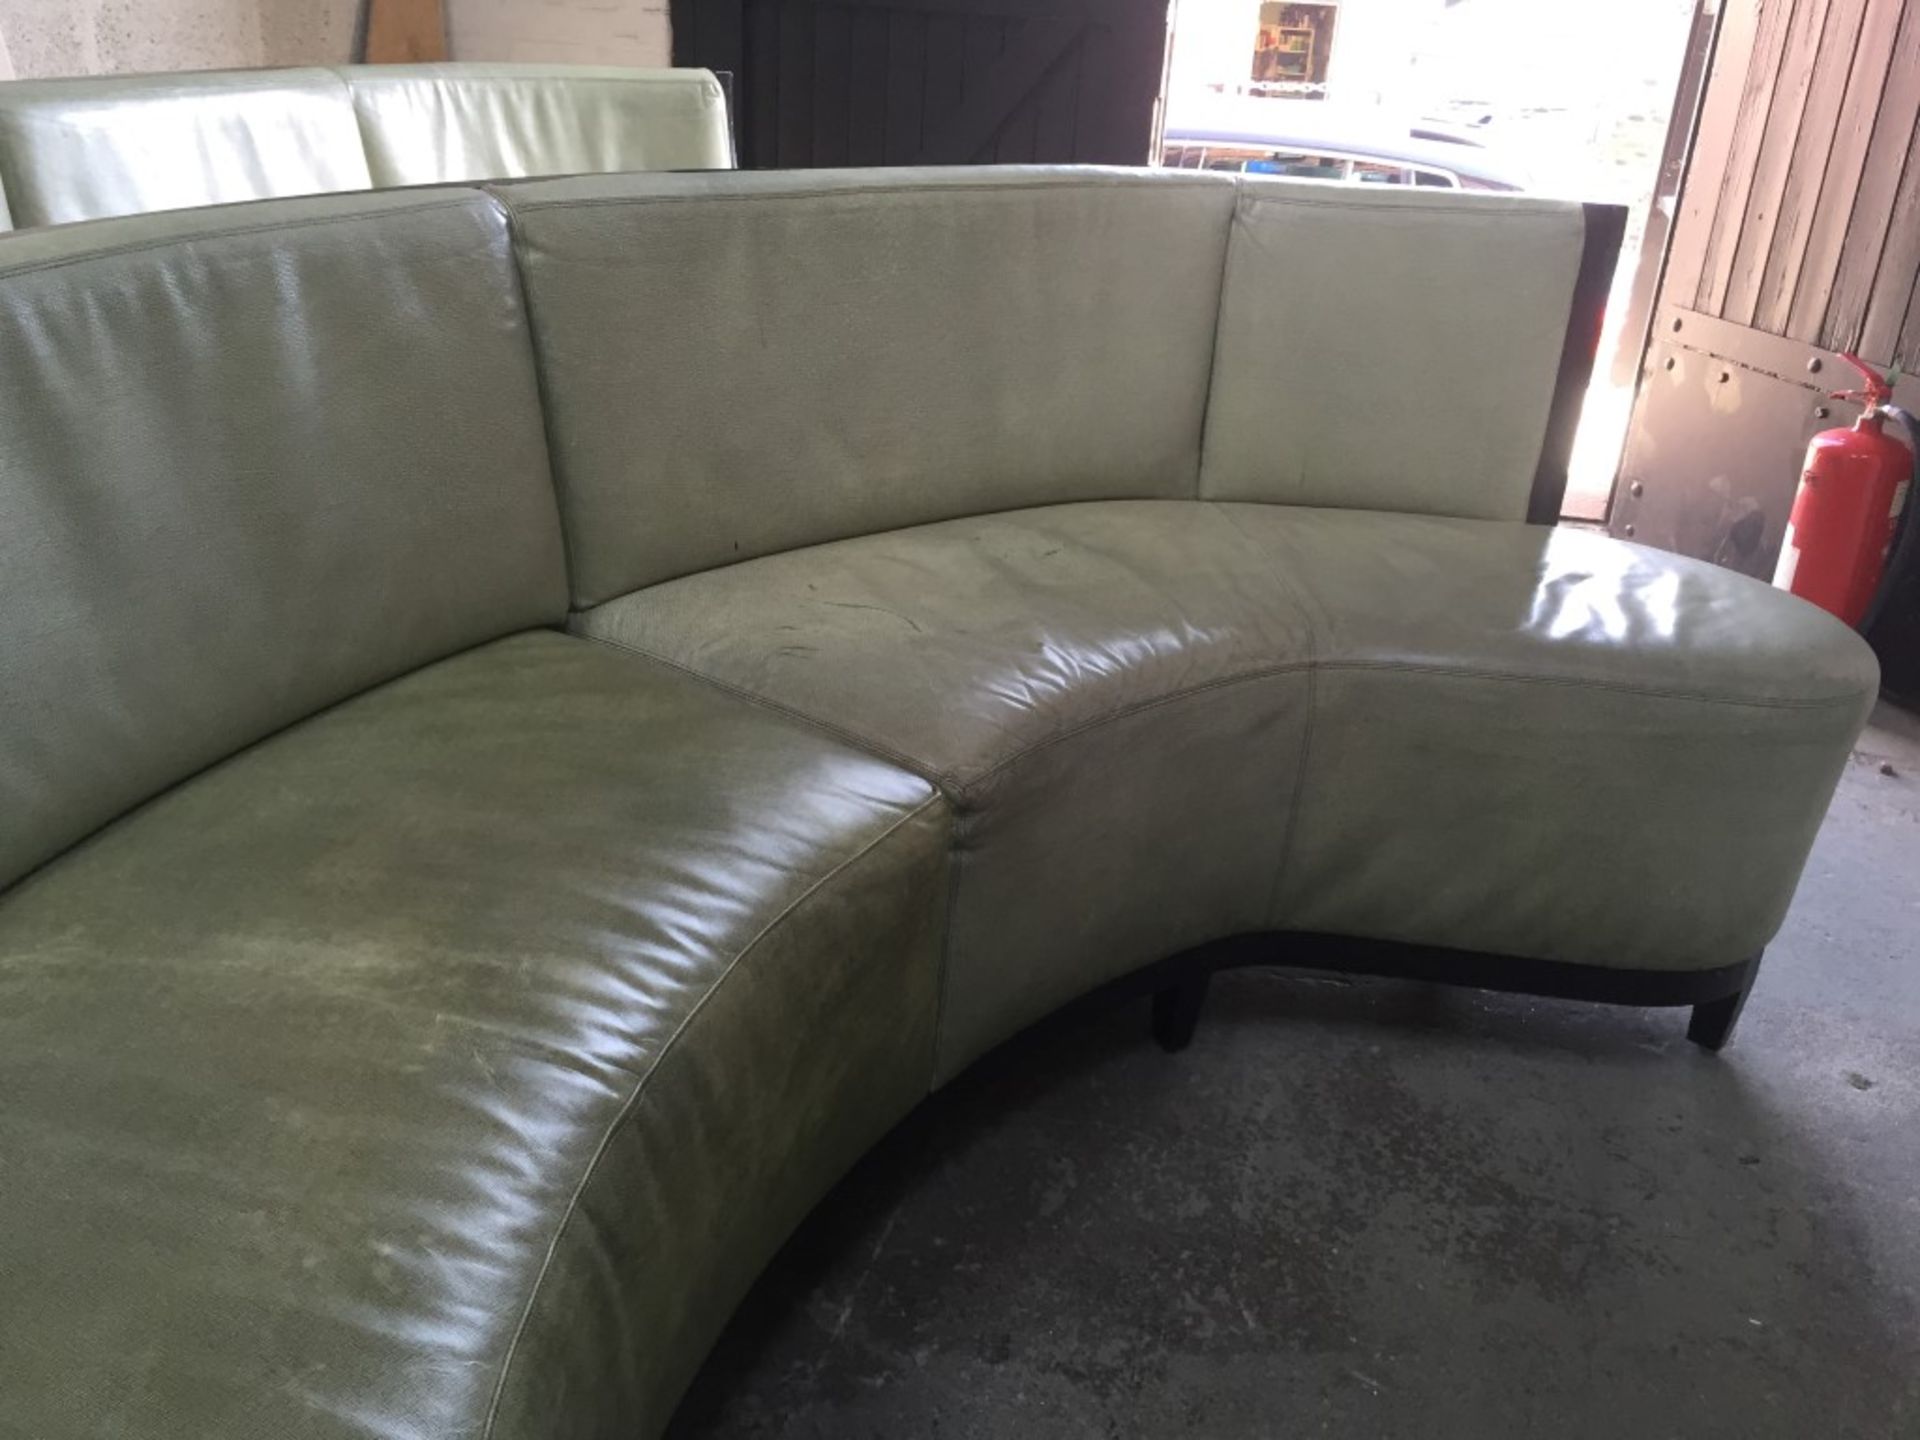 1 x Luxury Upholstered Curved Seating Area - Recently Removed From Nobu - Dimensions: W285 x D62cm x - Image 3 of 23